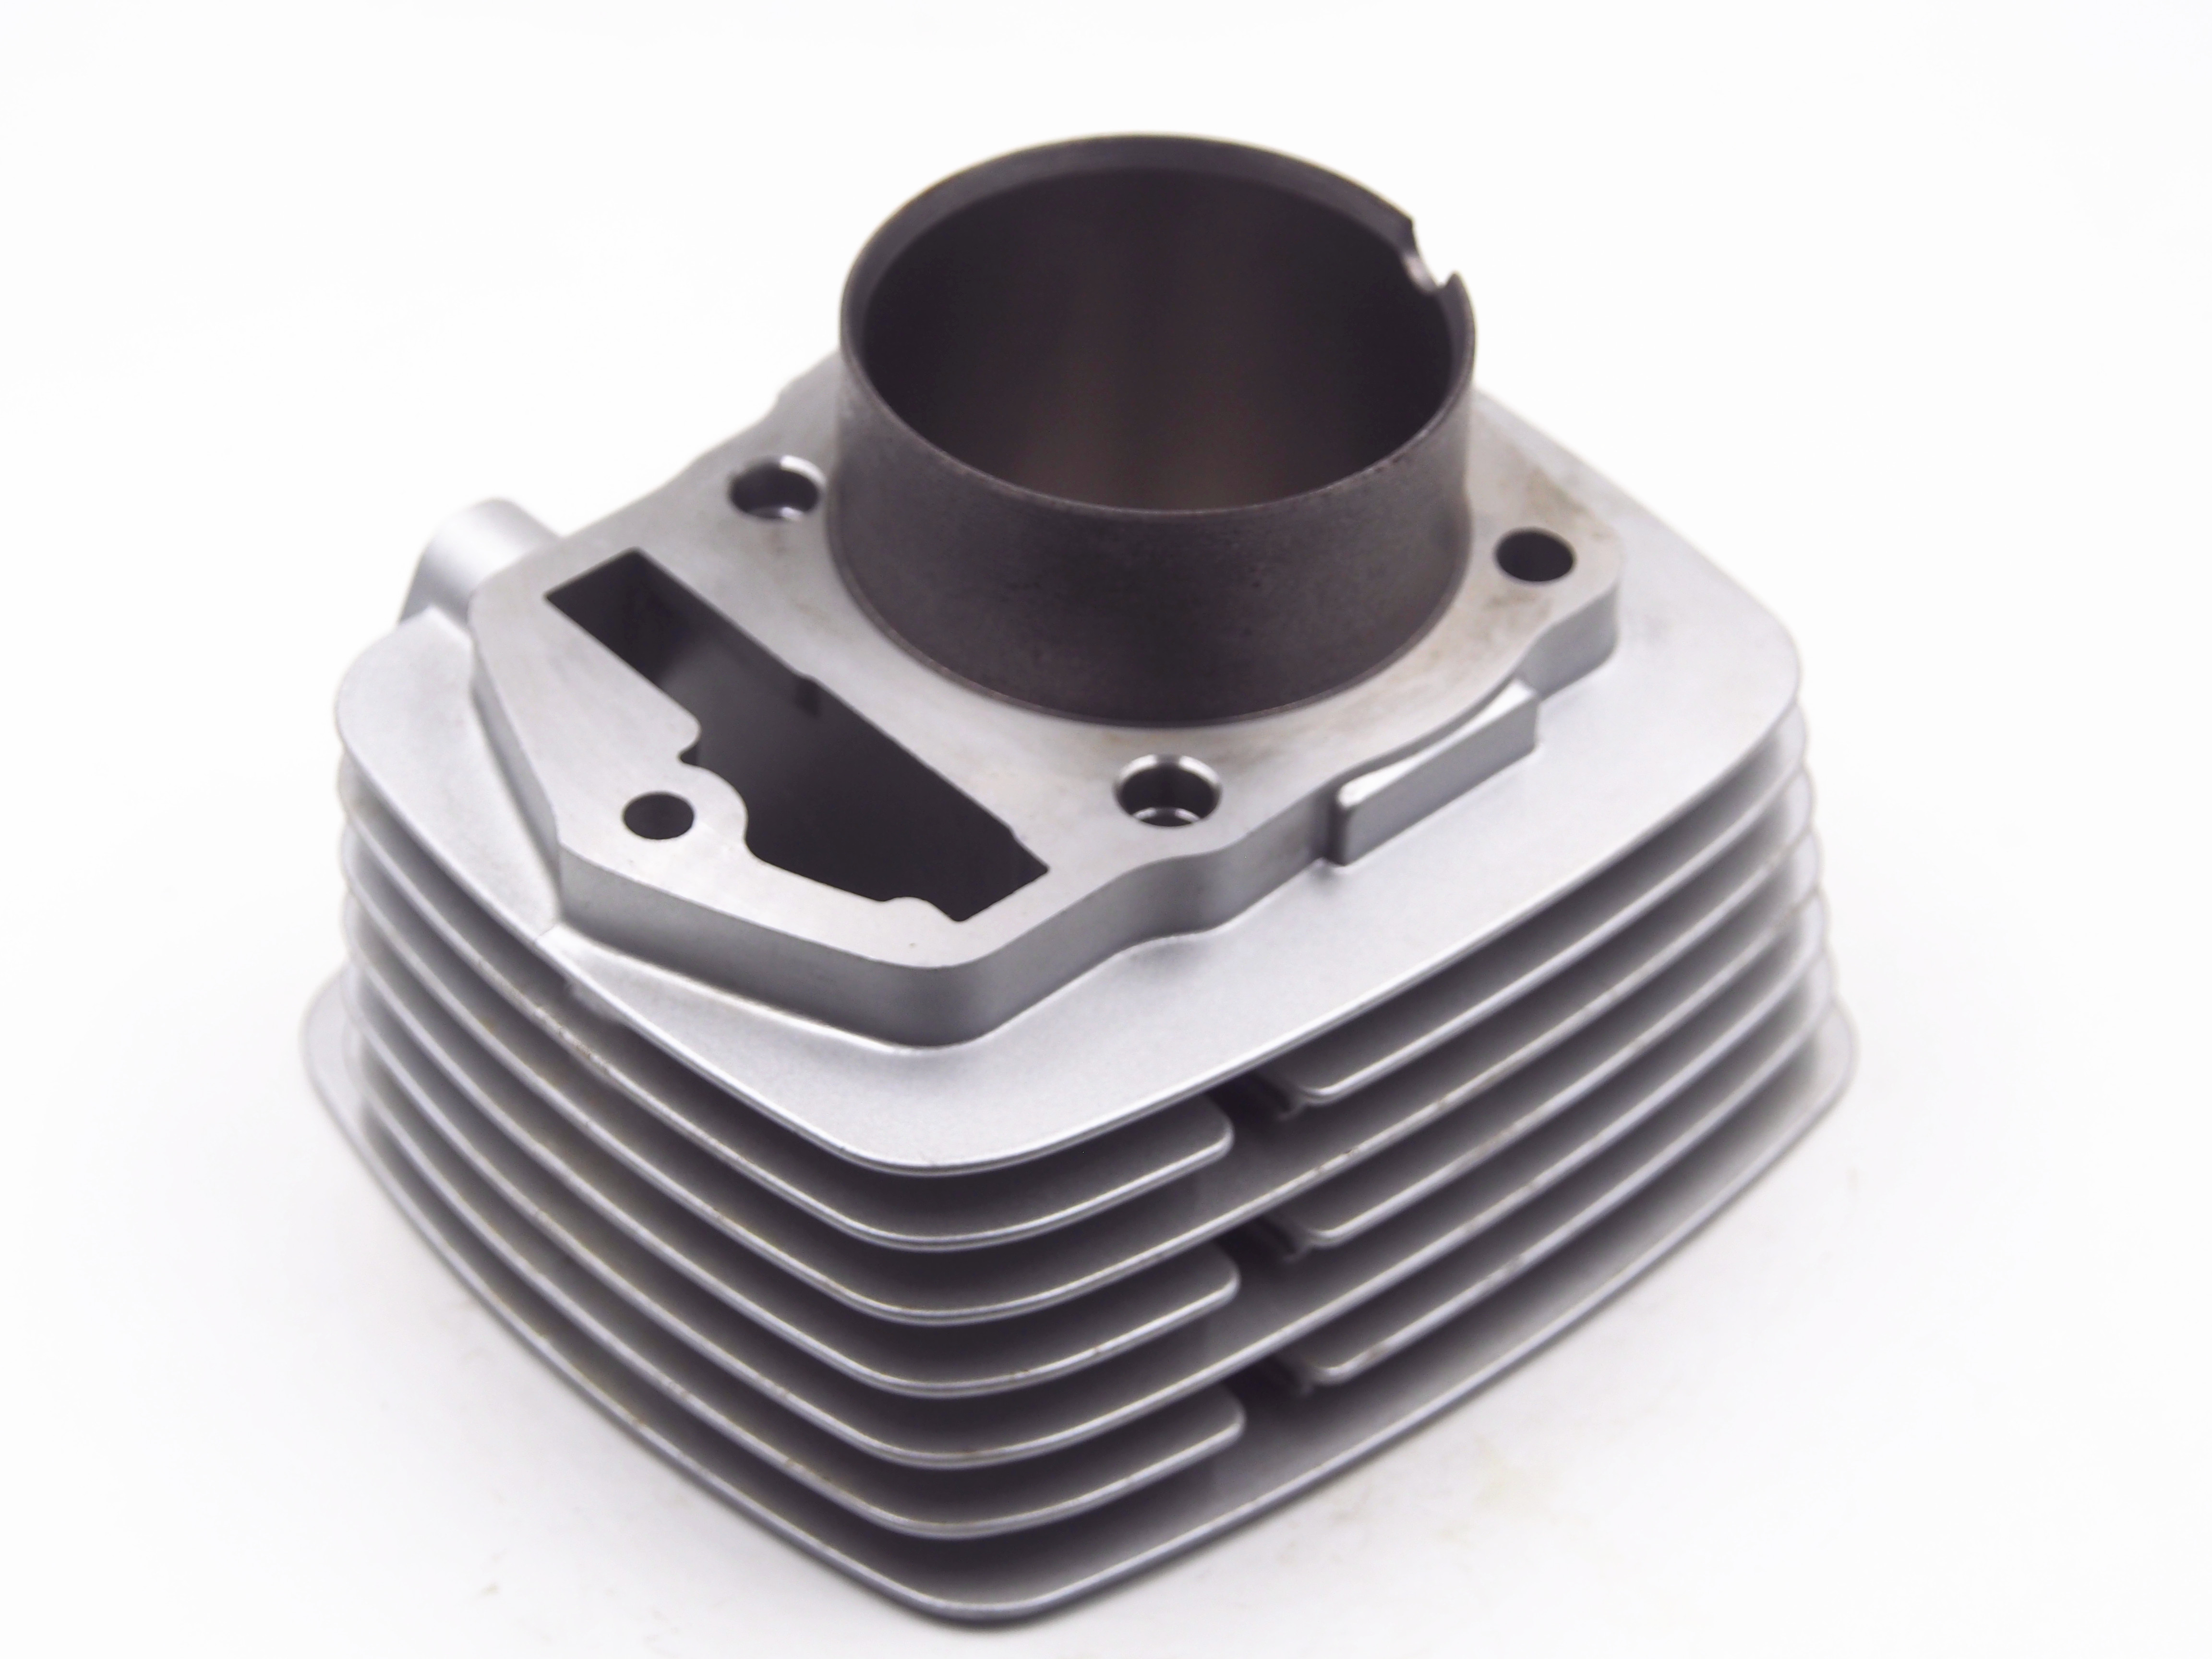 200cc Motorcycle Engine Block Air Cooled Cbx200 With 63.5mm Diameter